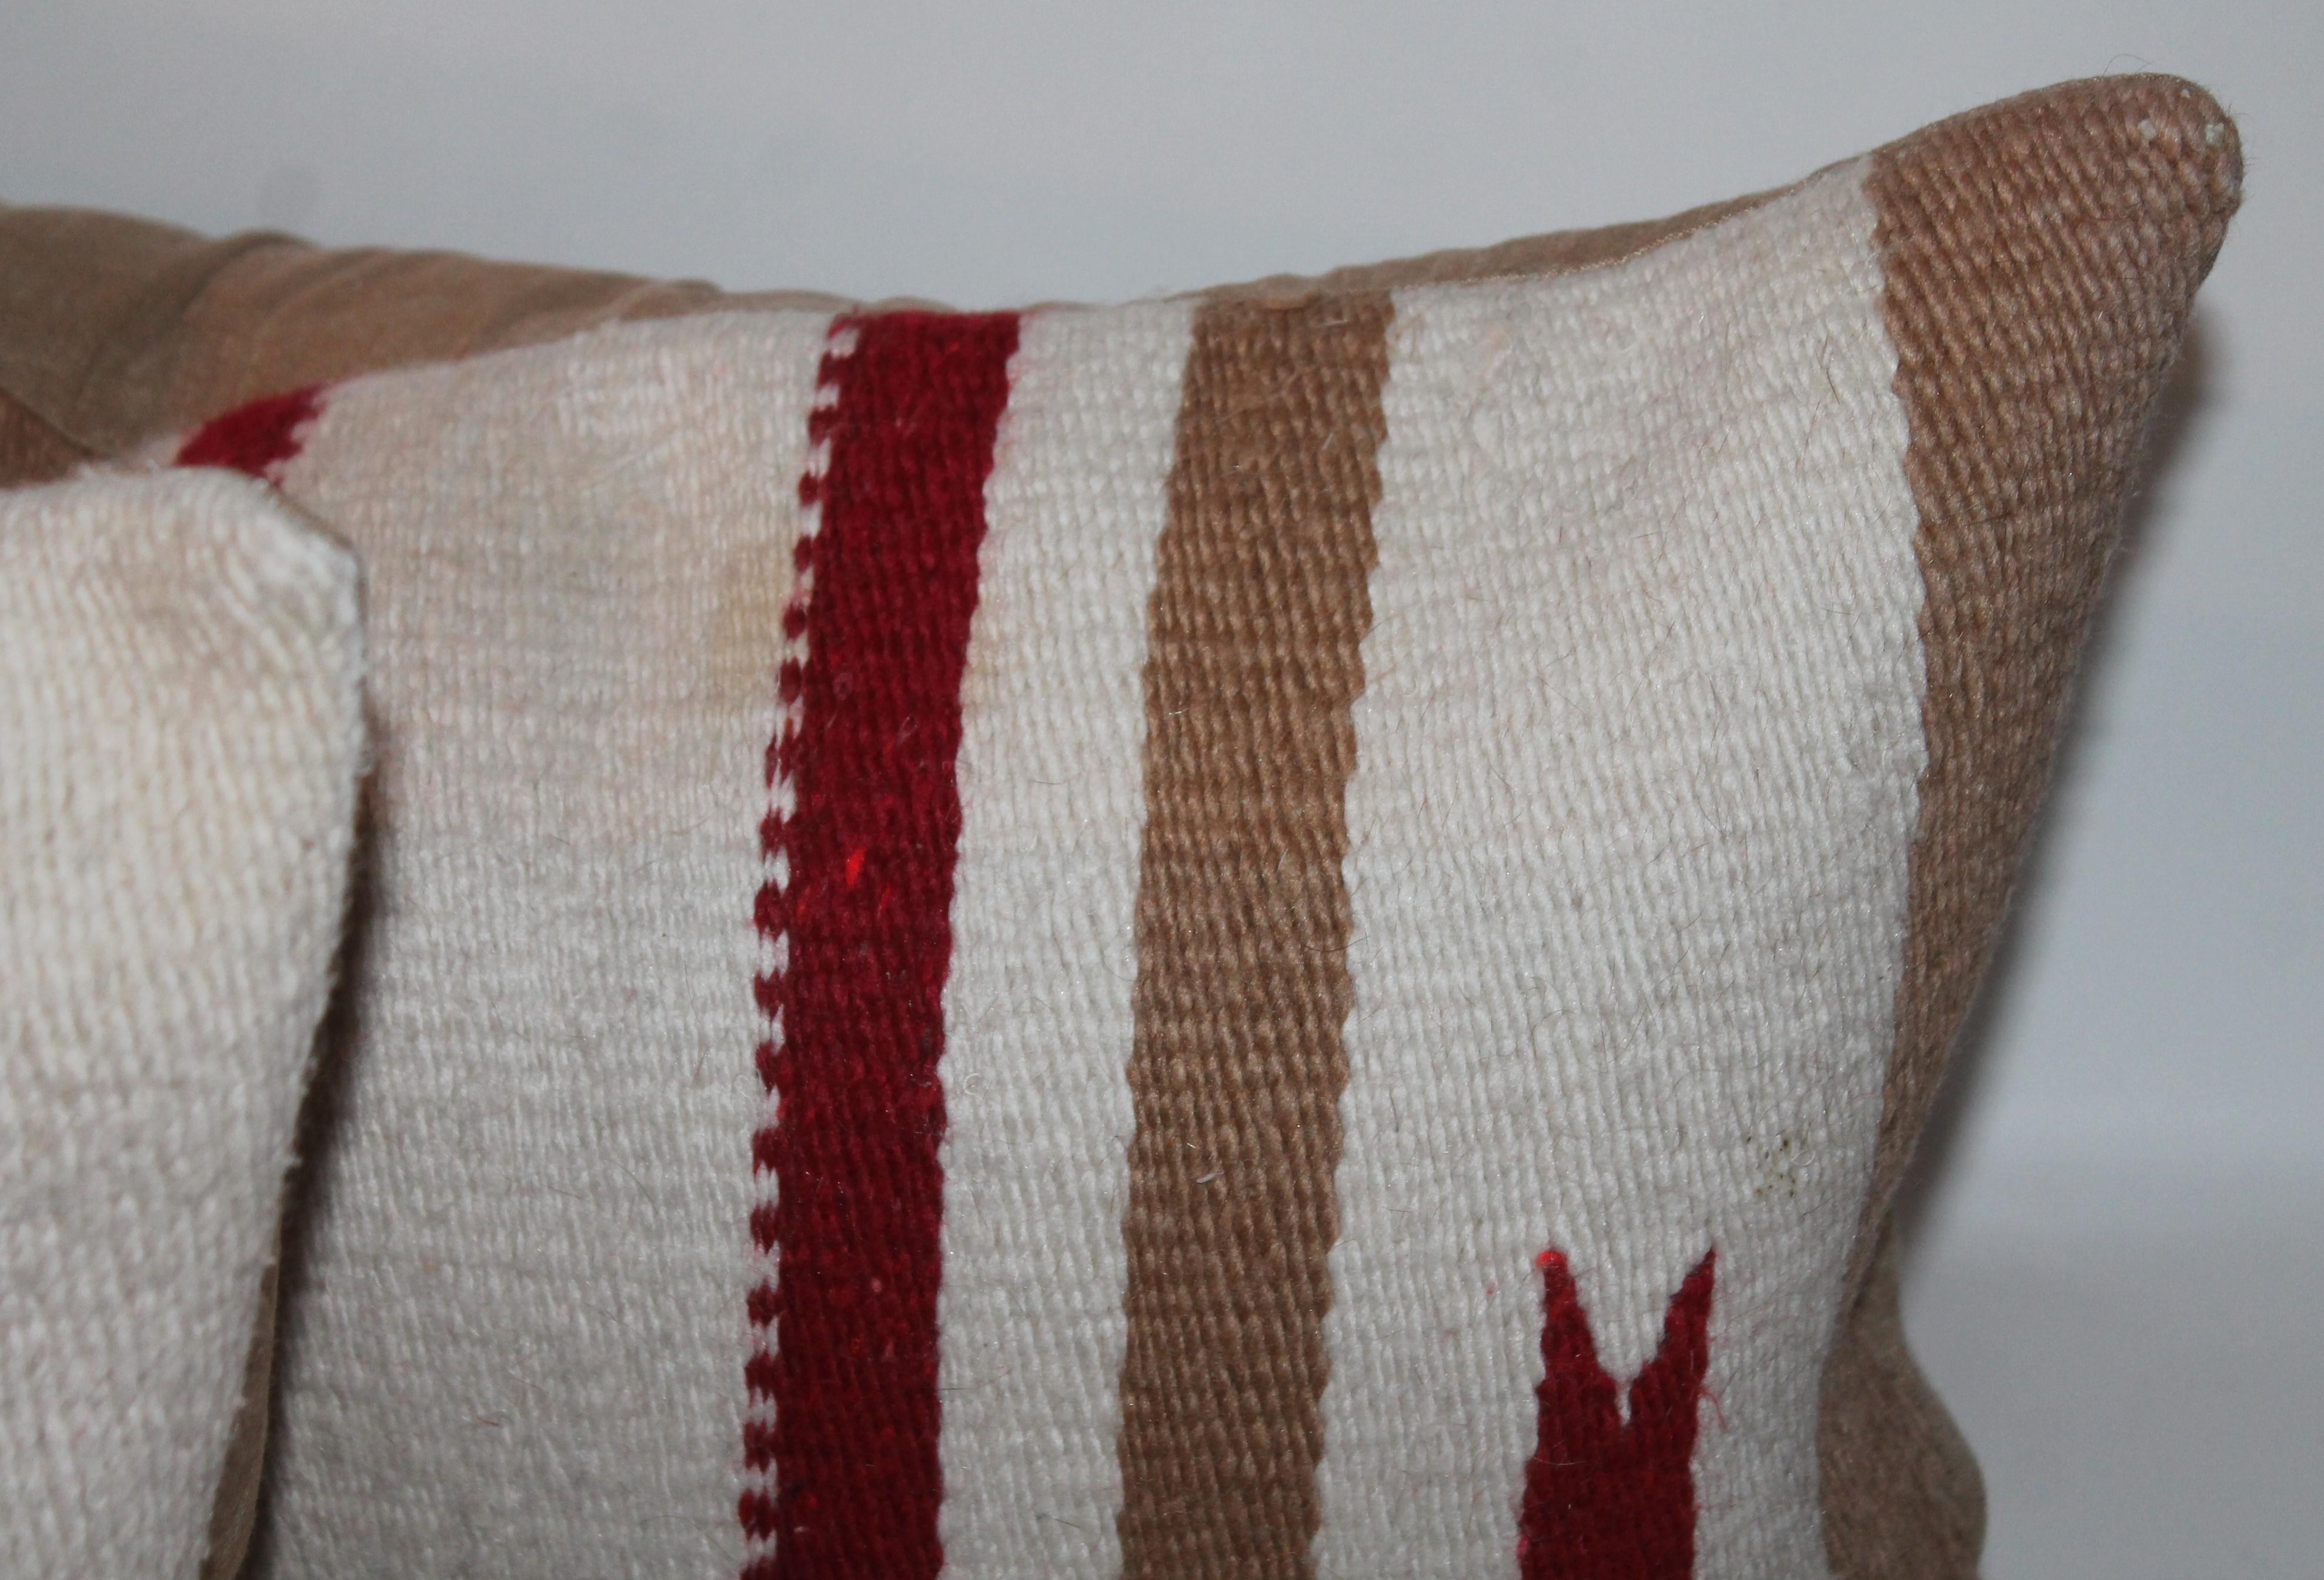 These Navajo Indian weaving saddle blanket bolster pillows are in good condition and have matching tan cotton linen backings. The inserts are down and feather fill. 

 